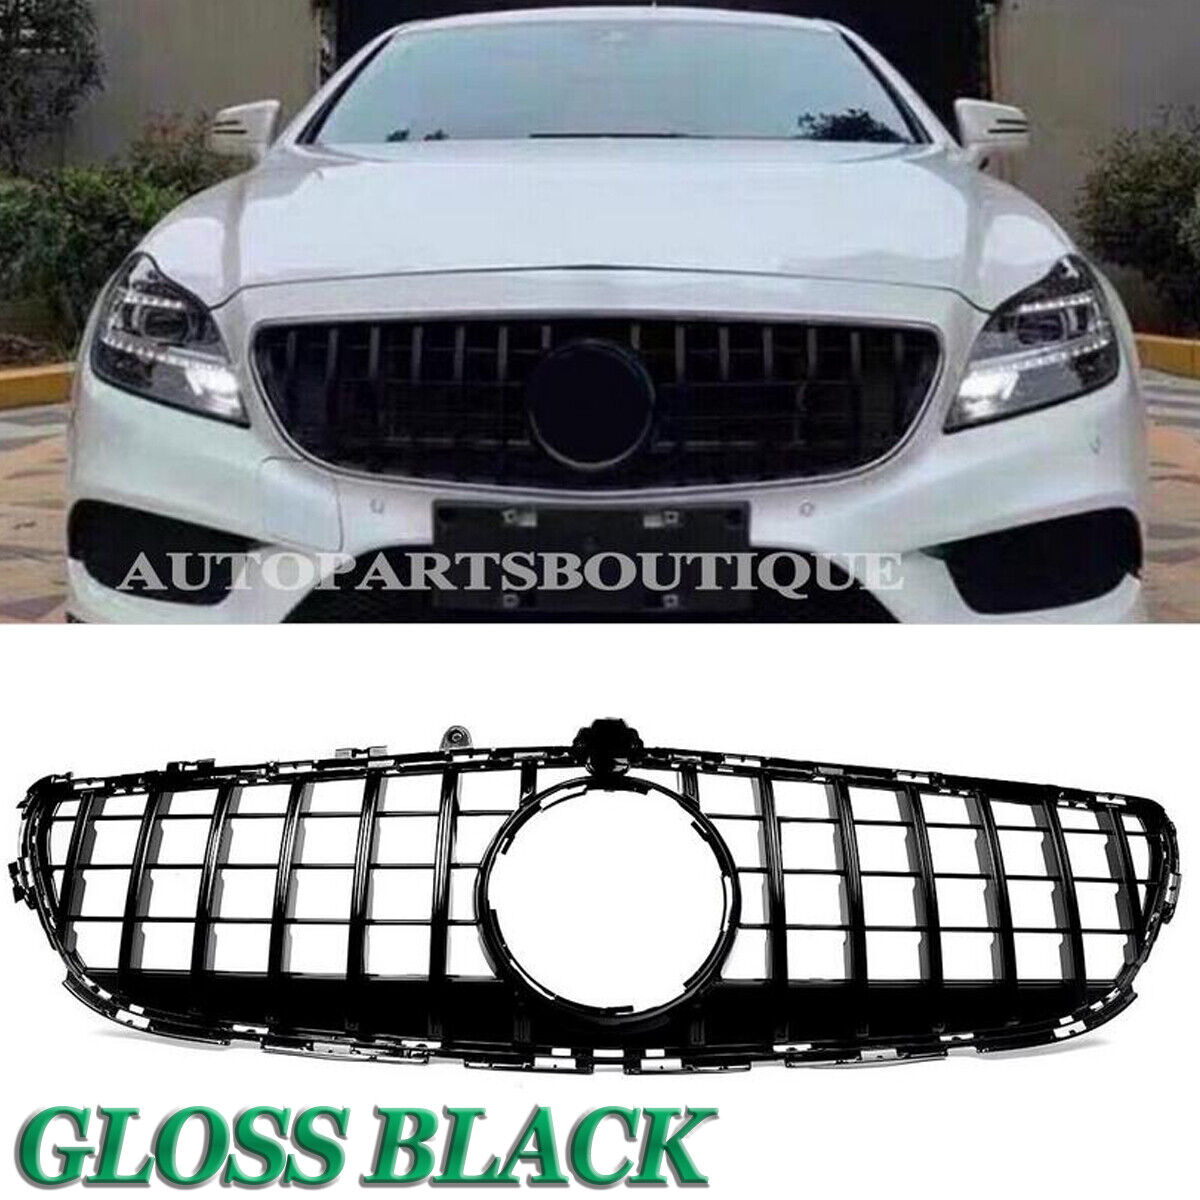 GT Style Front Grille Grill For Mercedes Benz W218 CLS-CLASS CLS550 2015-2018